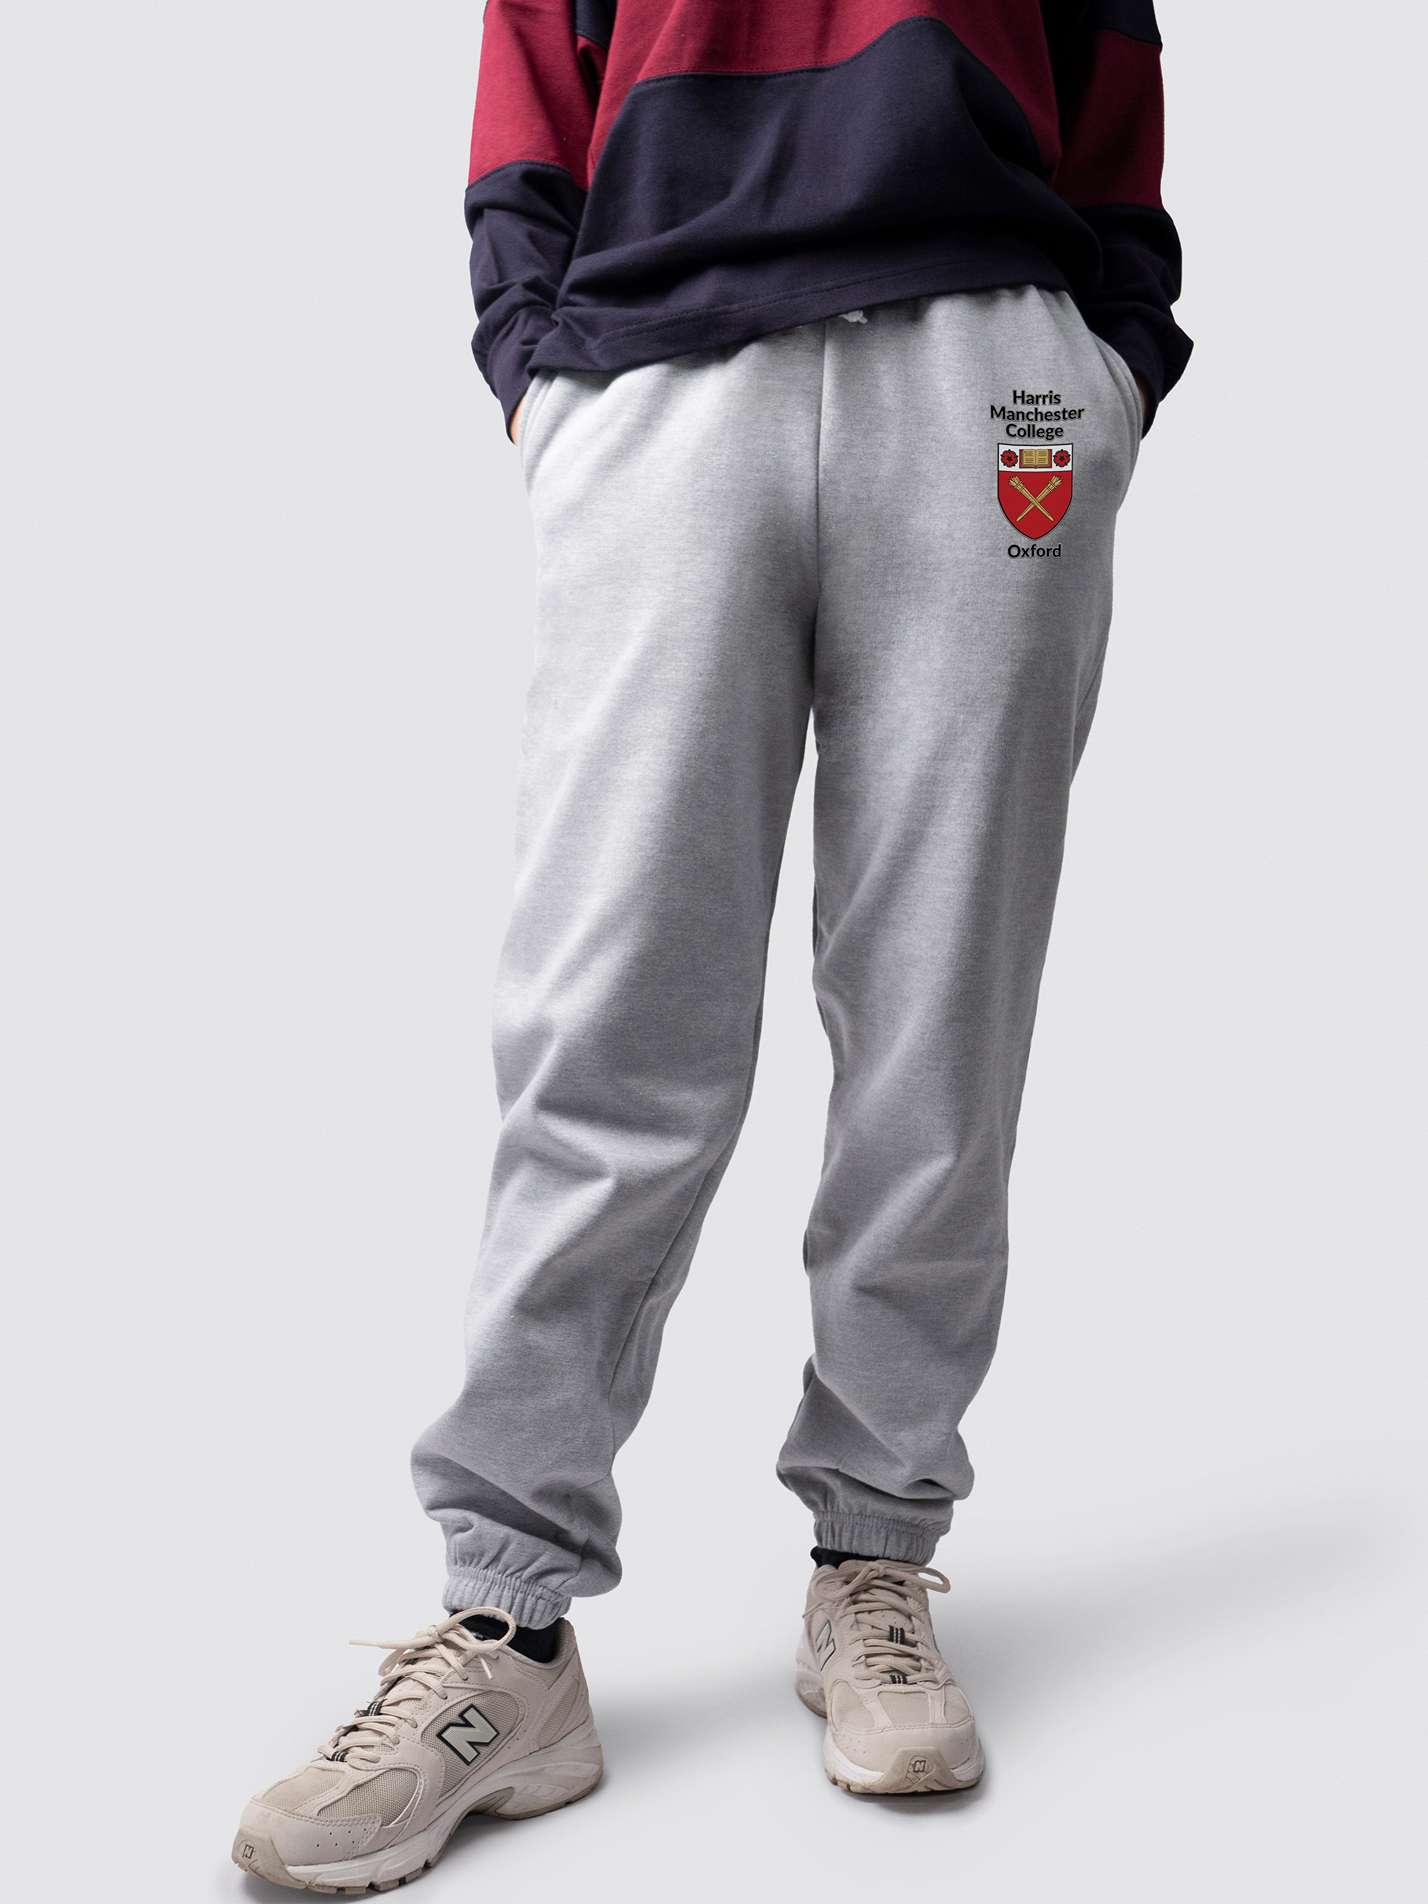 undergraduate cuffed sweatpants, made from soft cotton fabric, with Harris Manchester logo